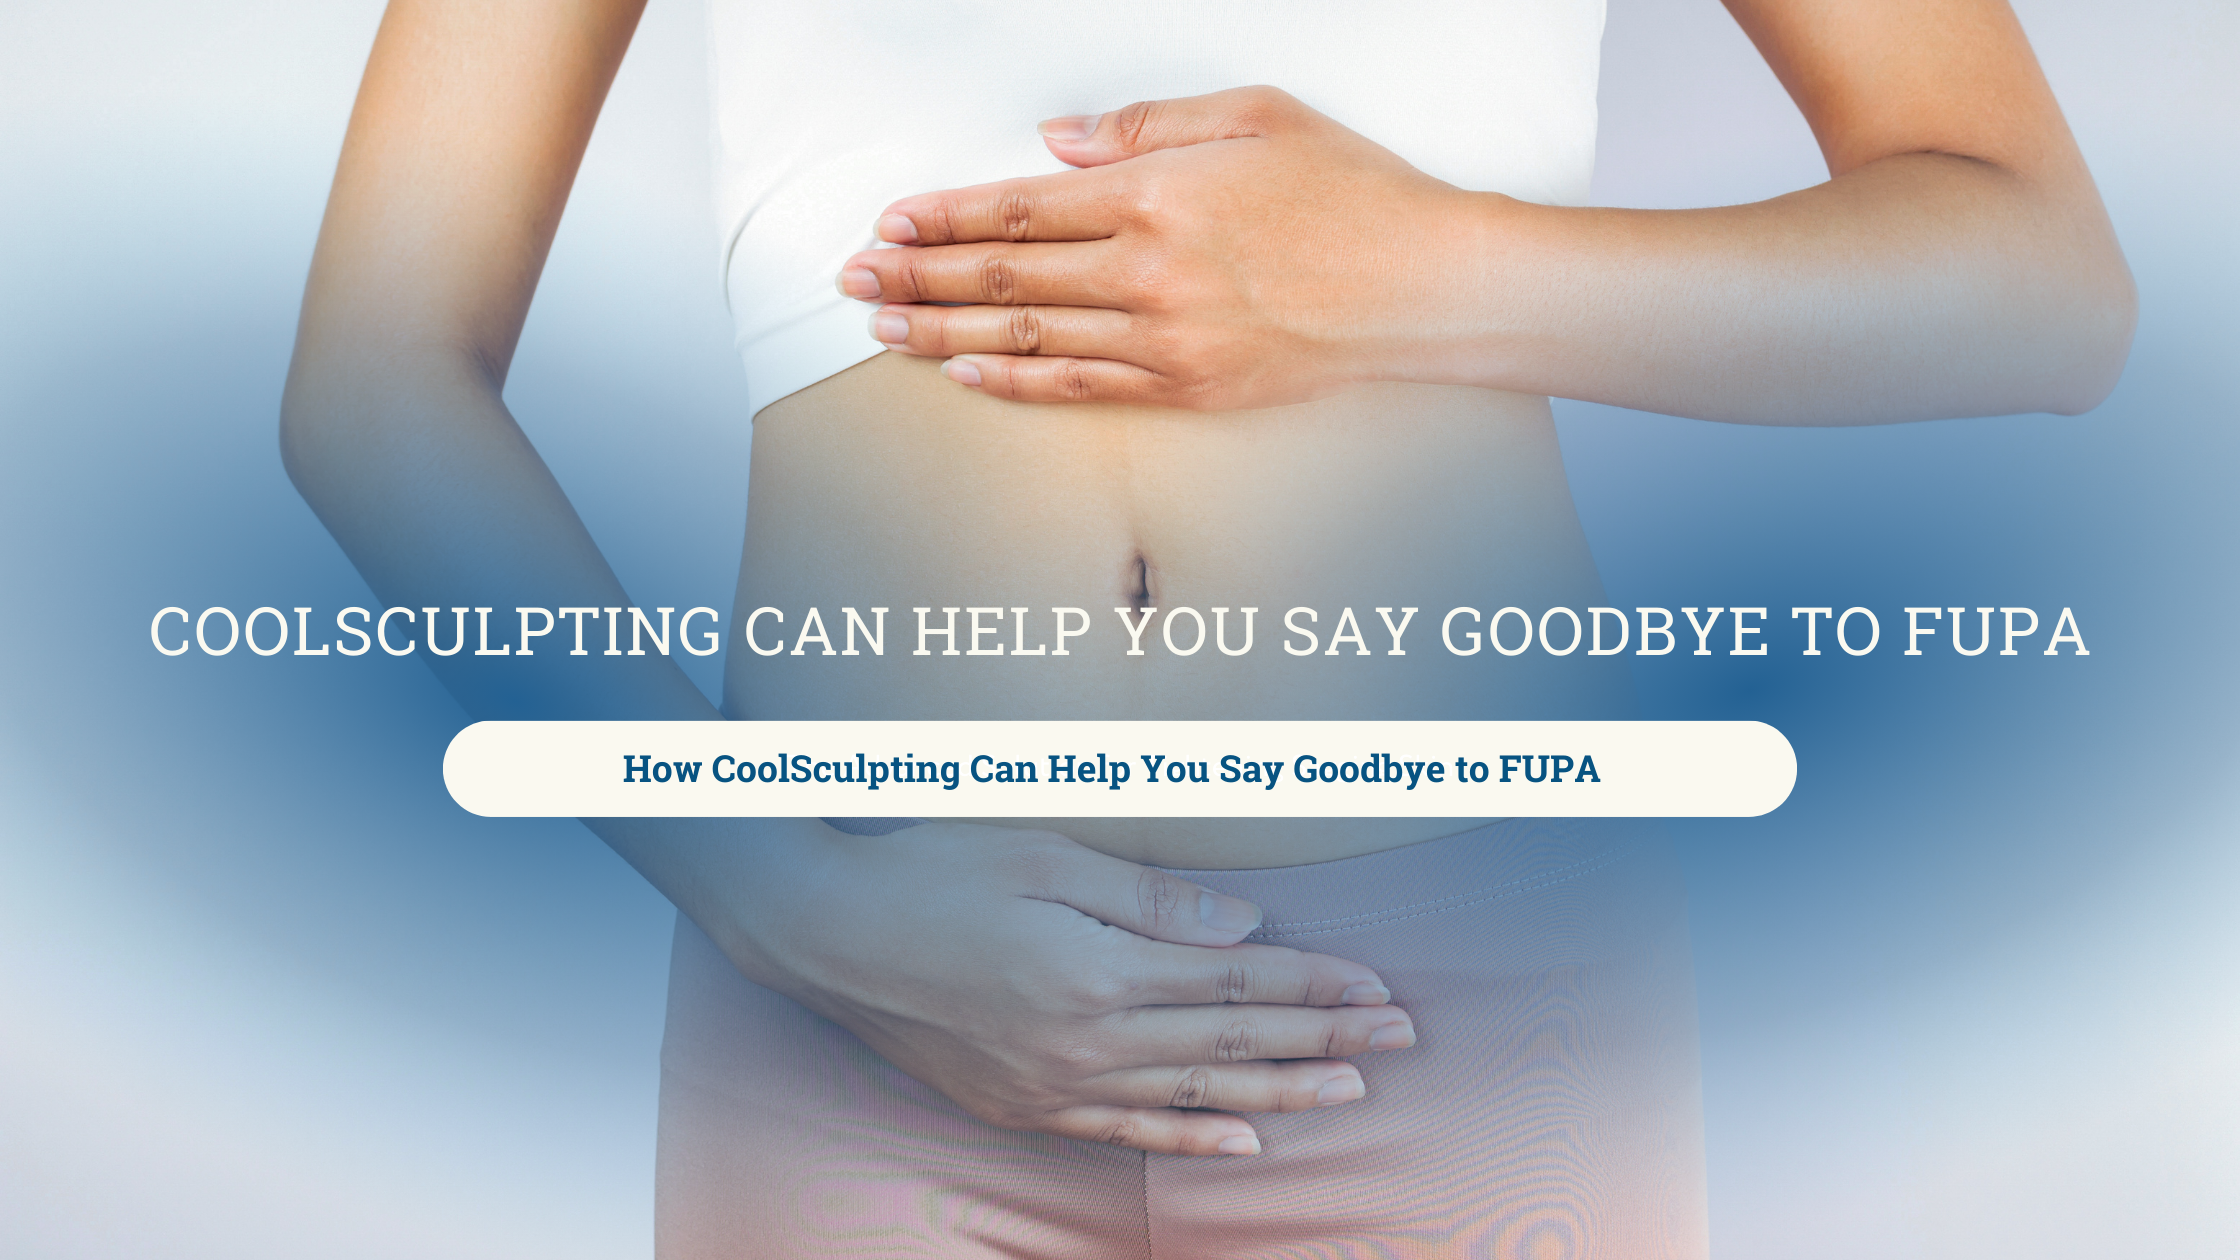 How CoolSculpting Can Help You Say Goodbye to FUPA